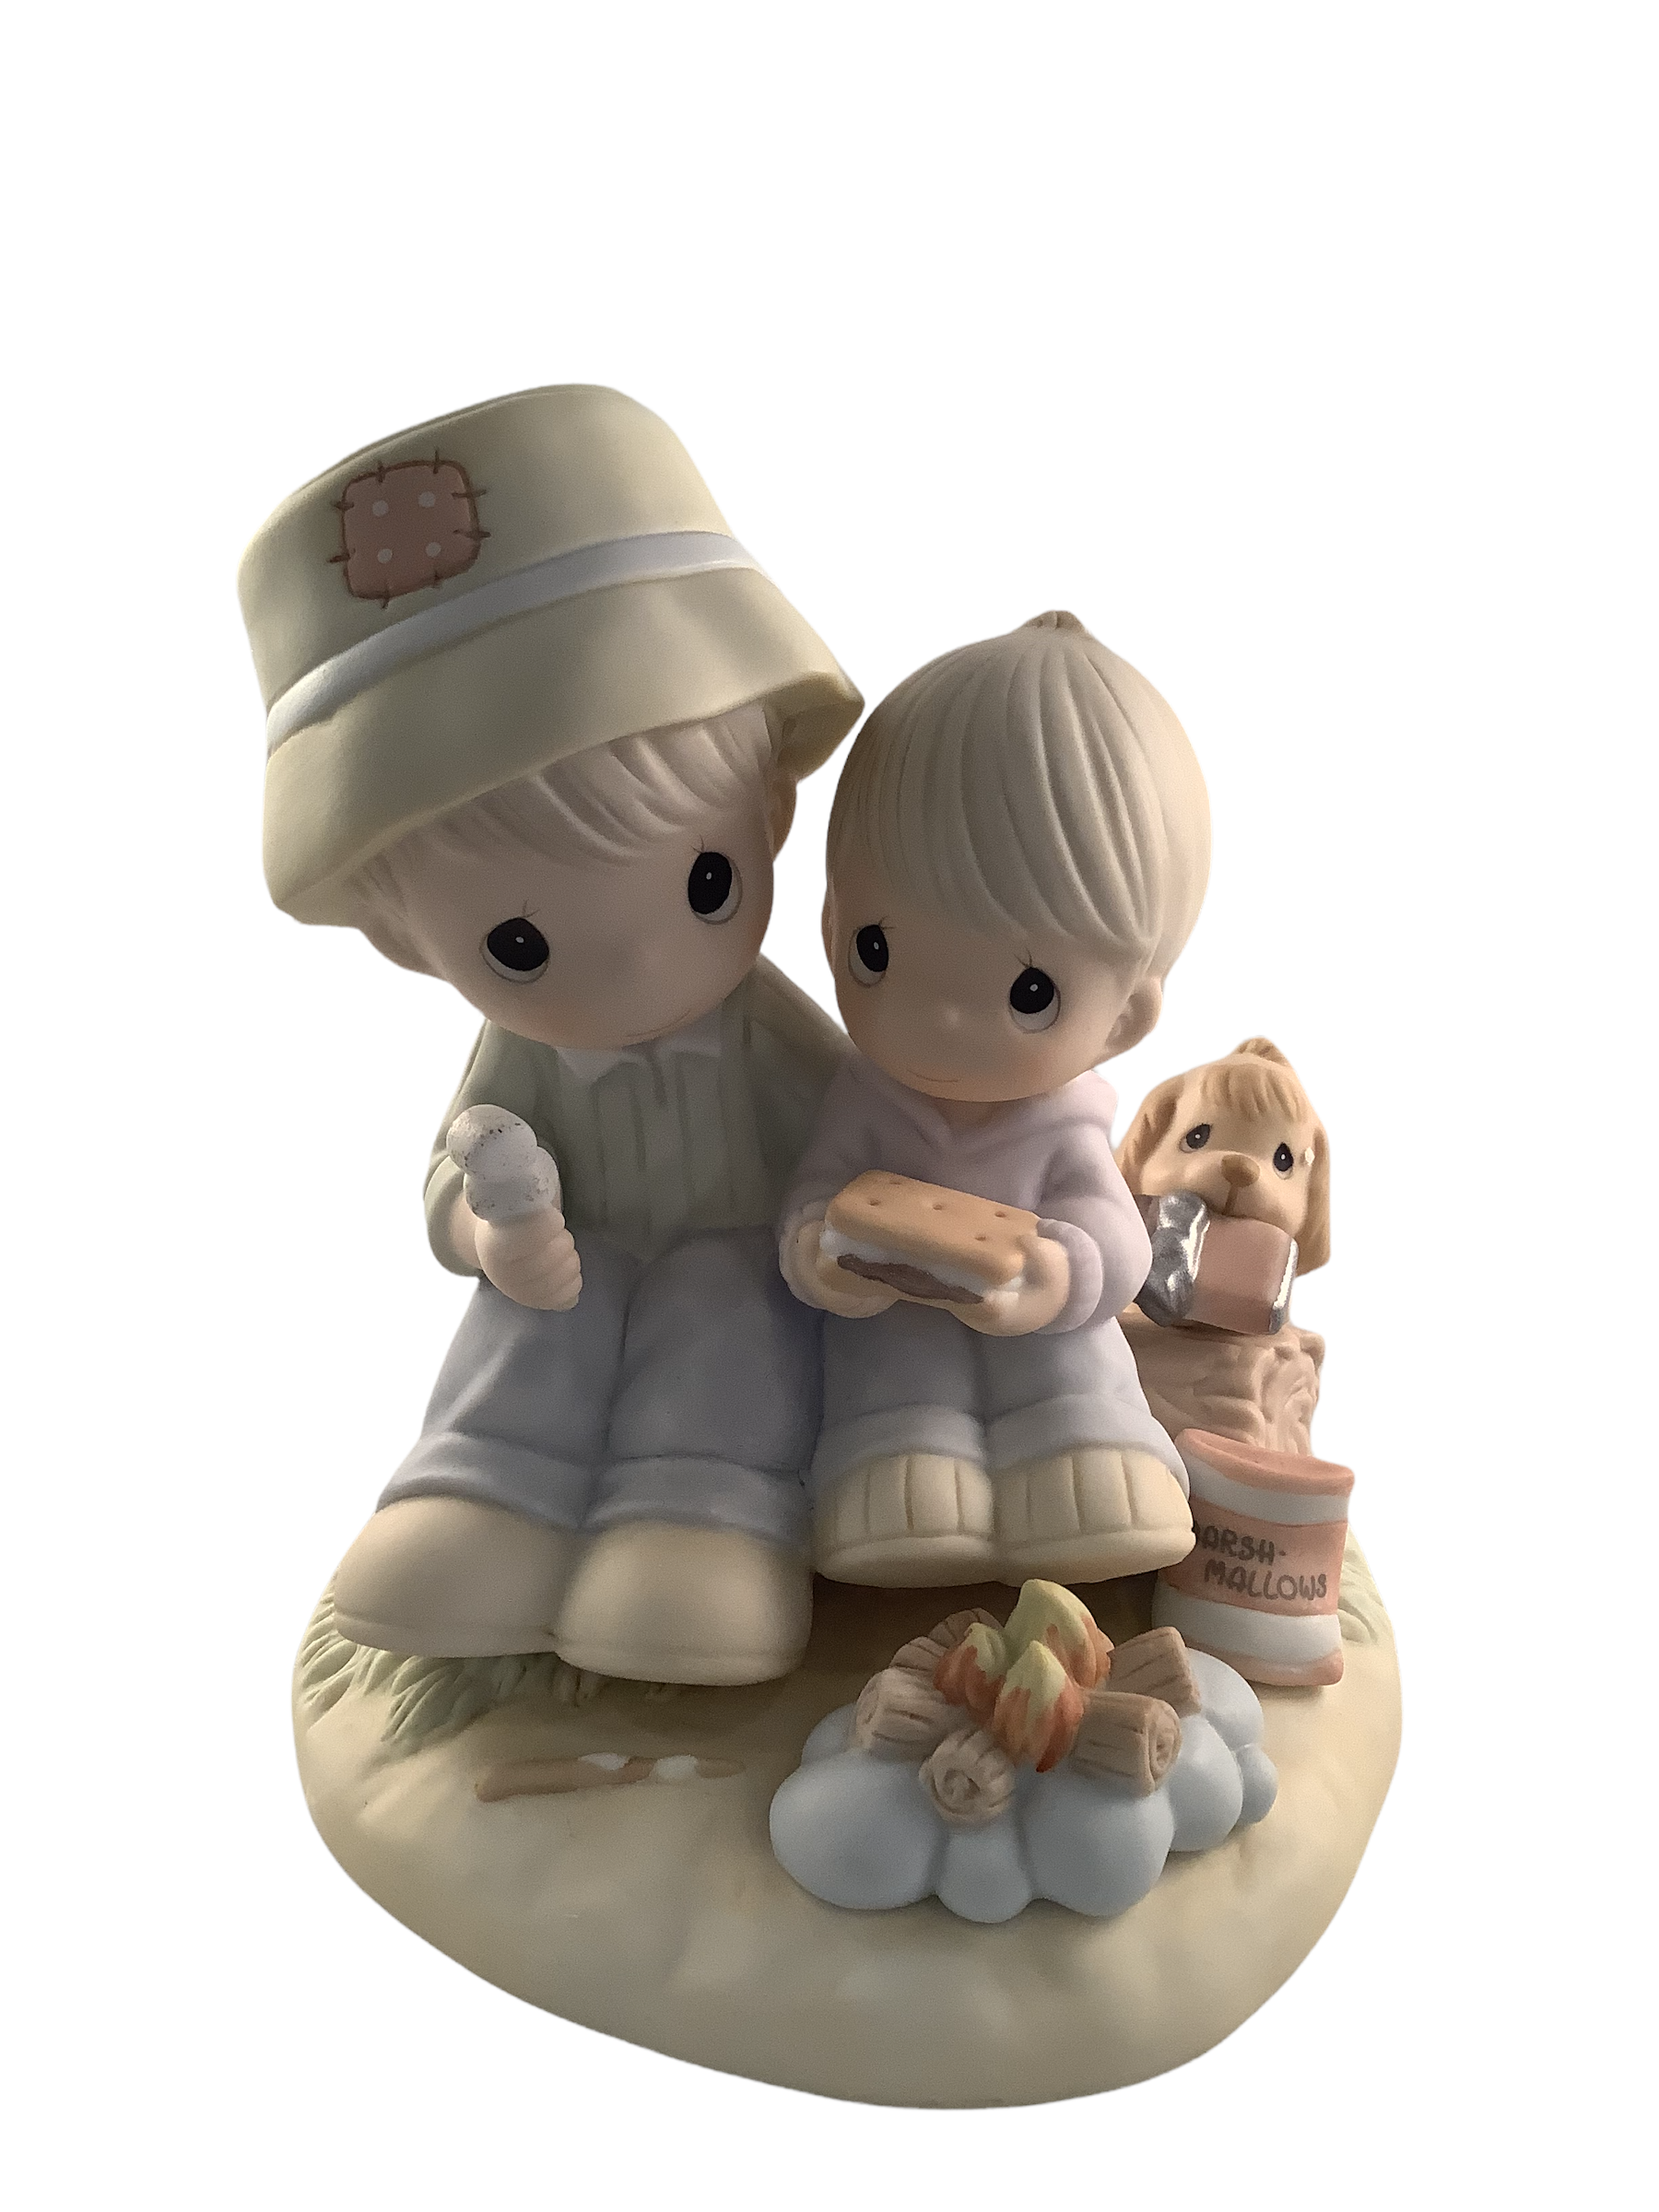 S'More Time Spent With You - Precious Moment Figurine